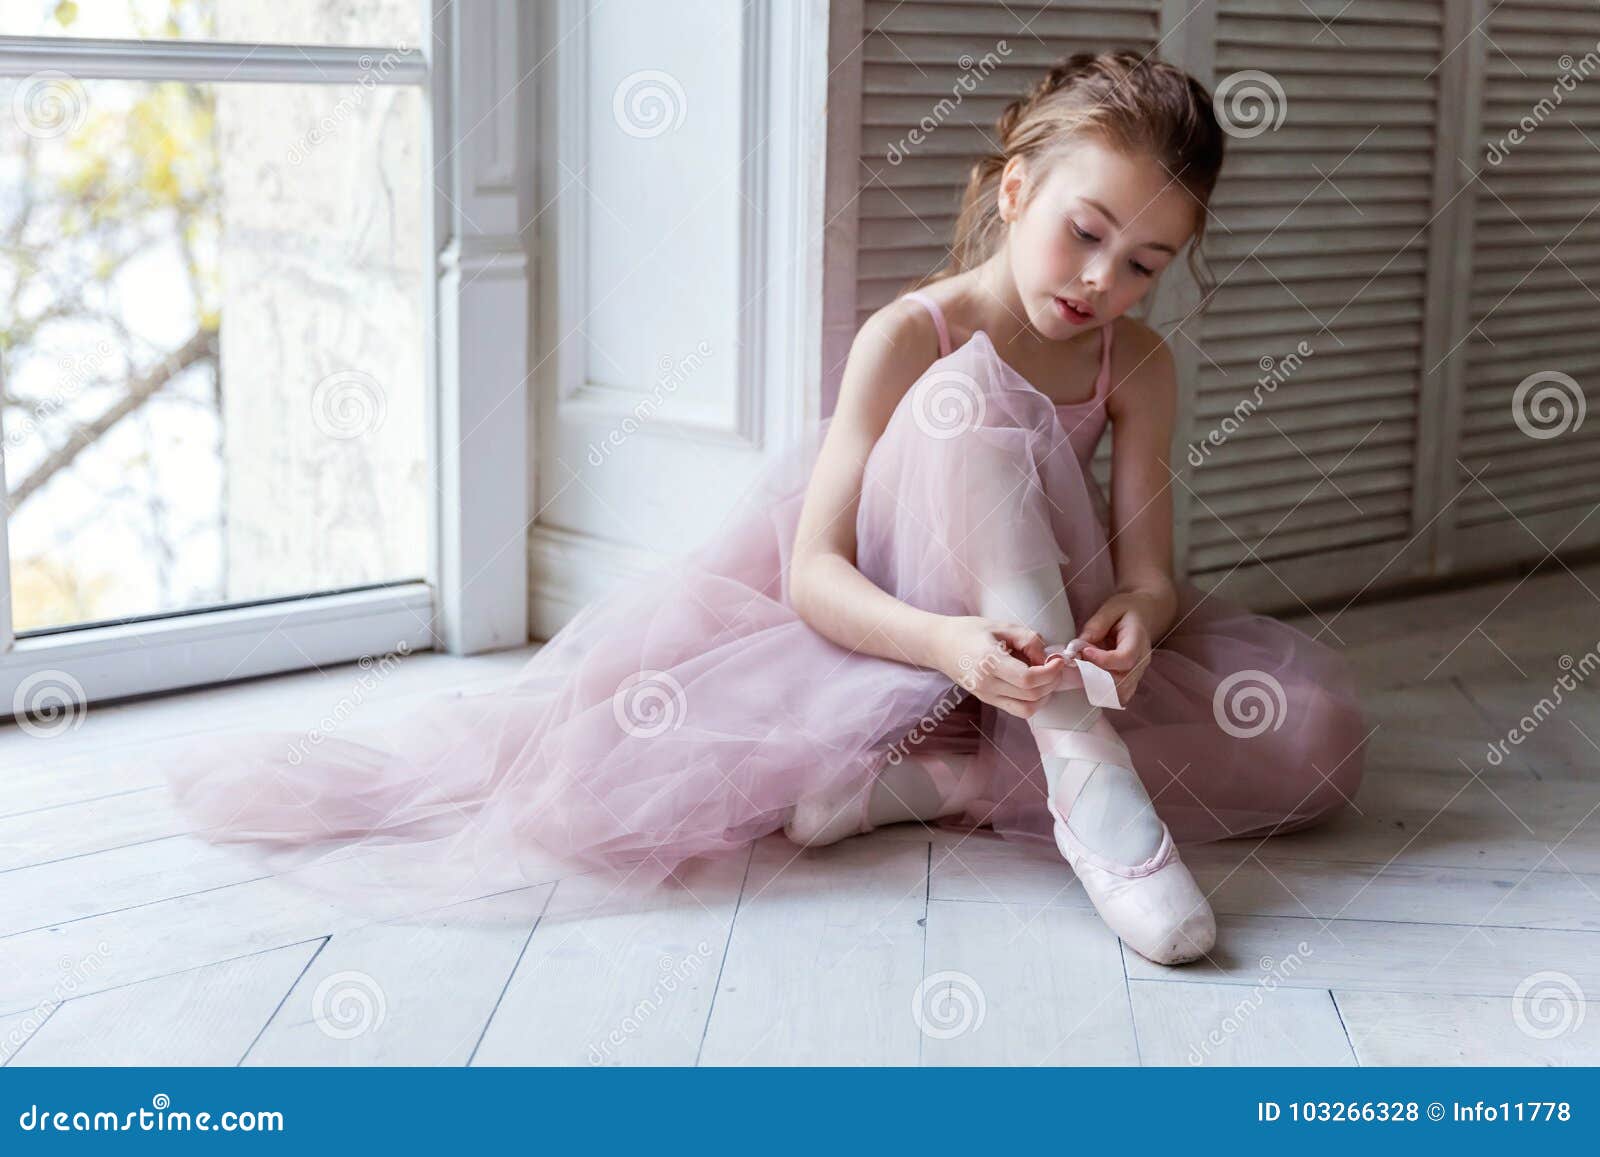 Ballerina Puts Pointe Shoes Stock Photo - Image of girl, elements ...